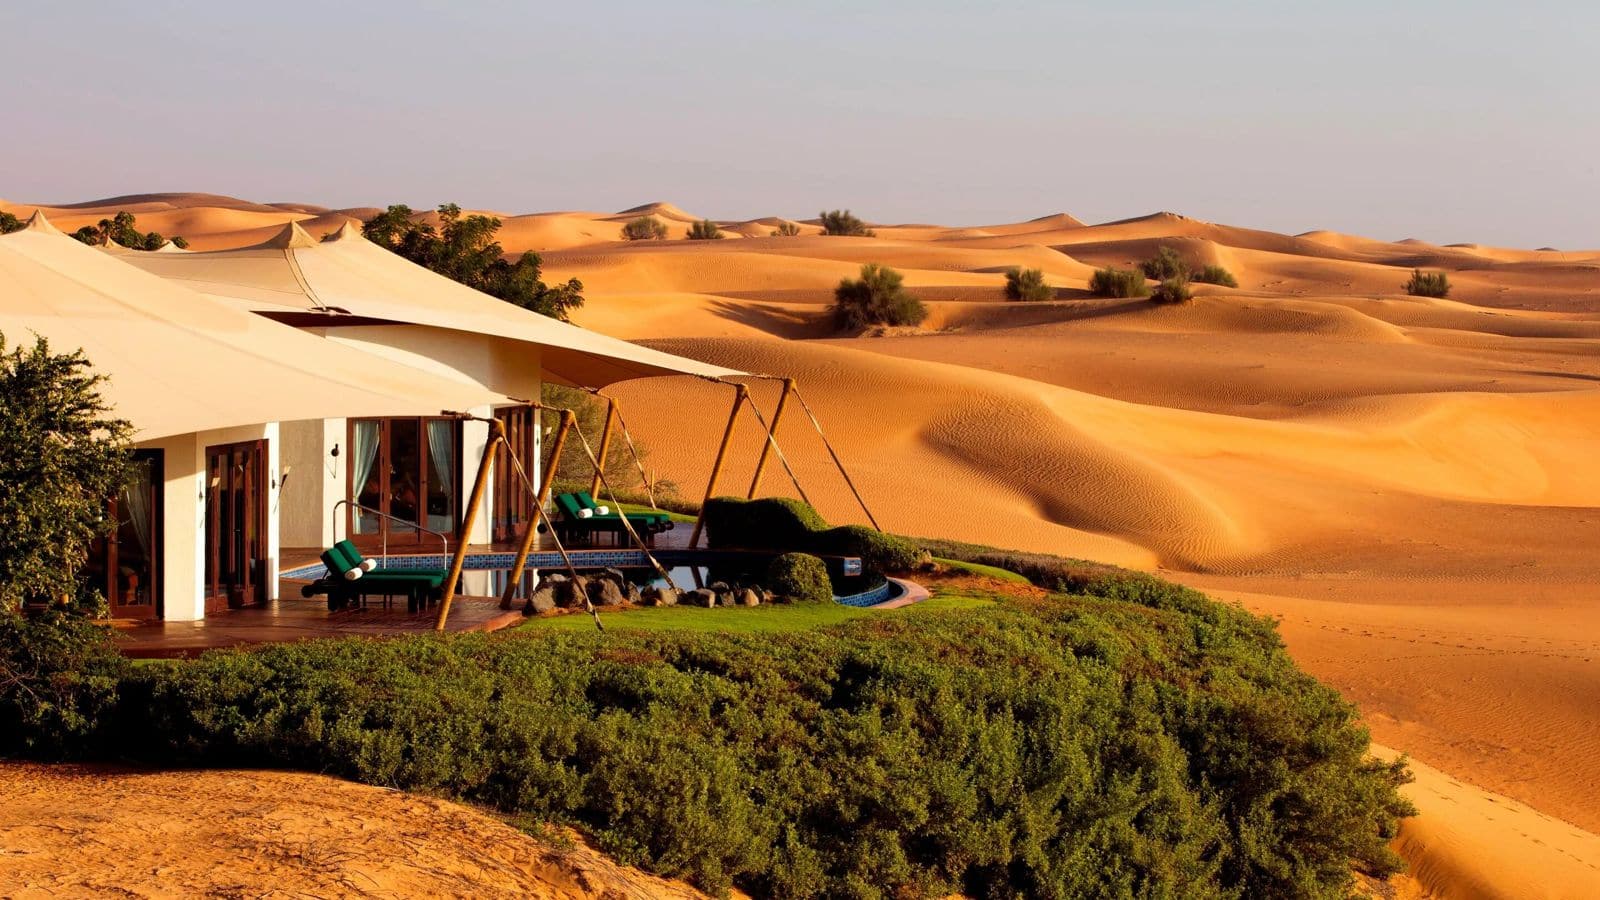 Dubai's desert resort extravaganza: Top accommodations for a comfortable stay